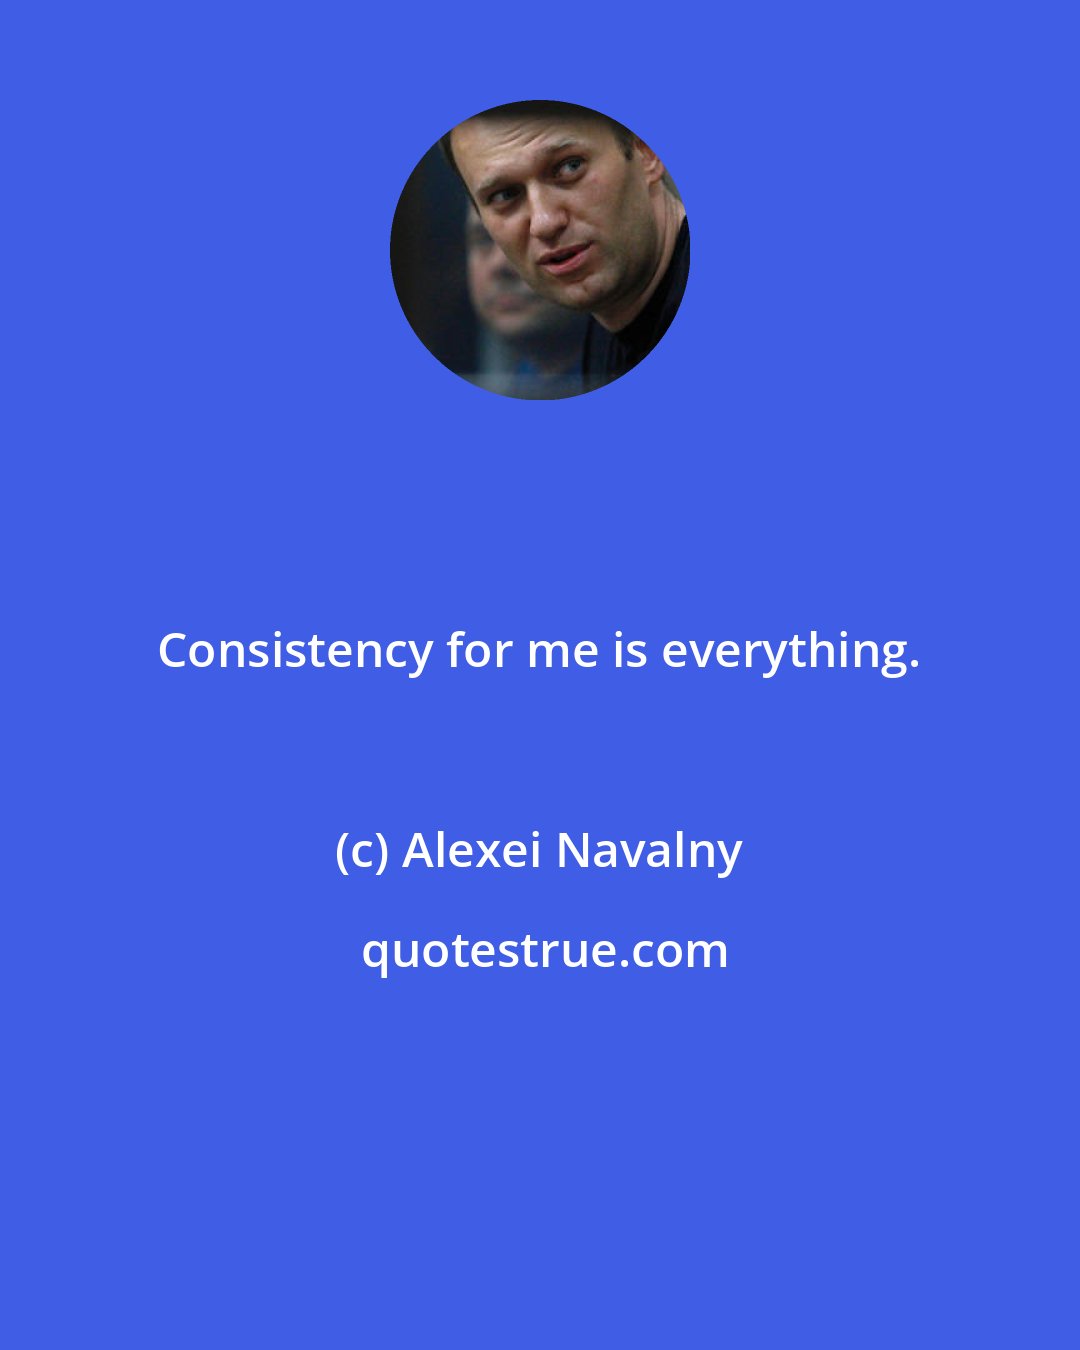 Alexei Navalny: Consistency for me is everything.